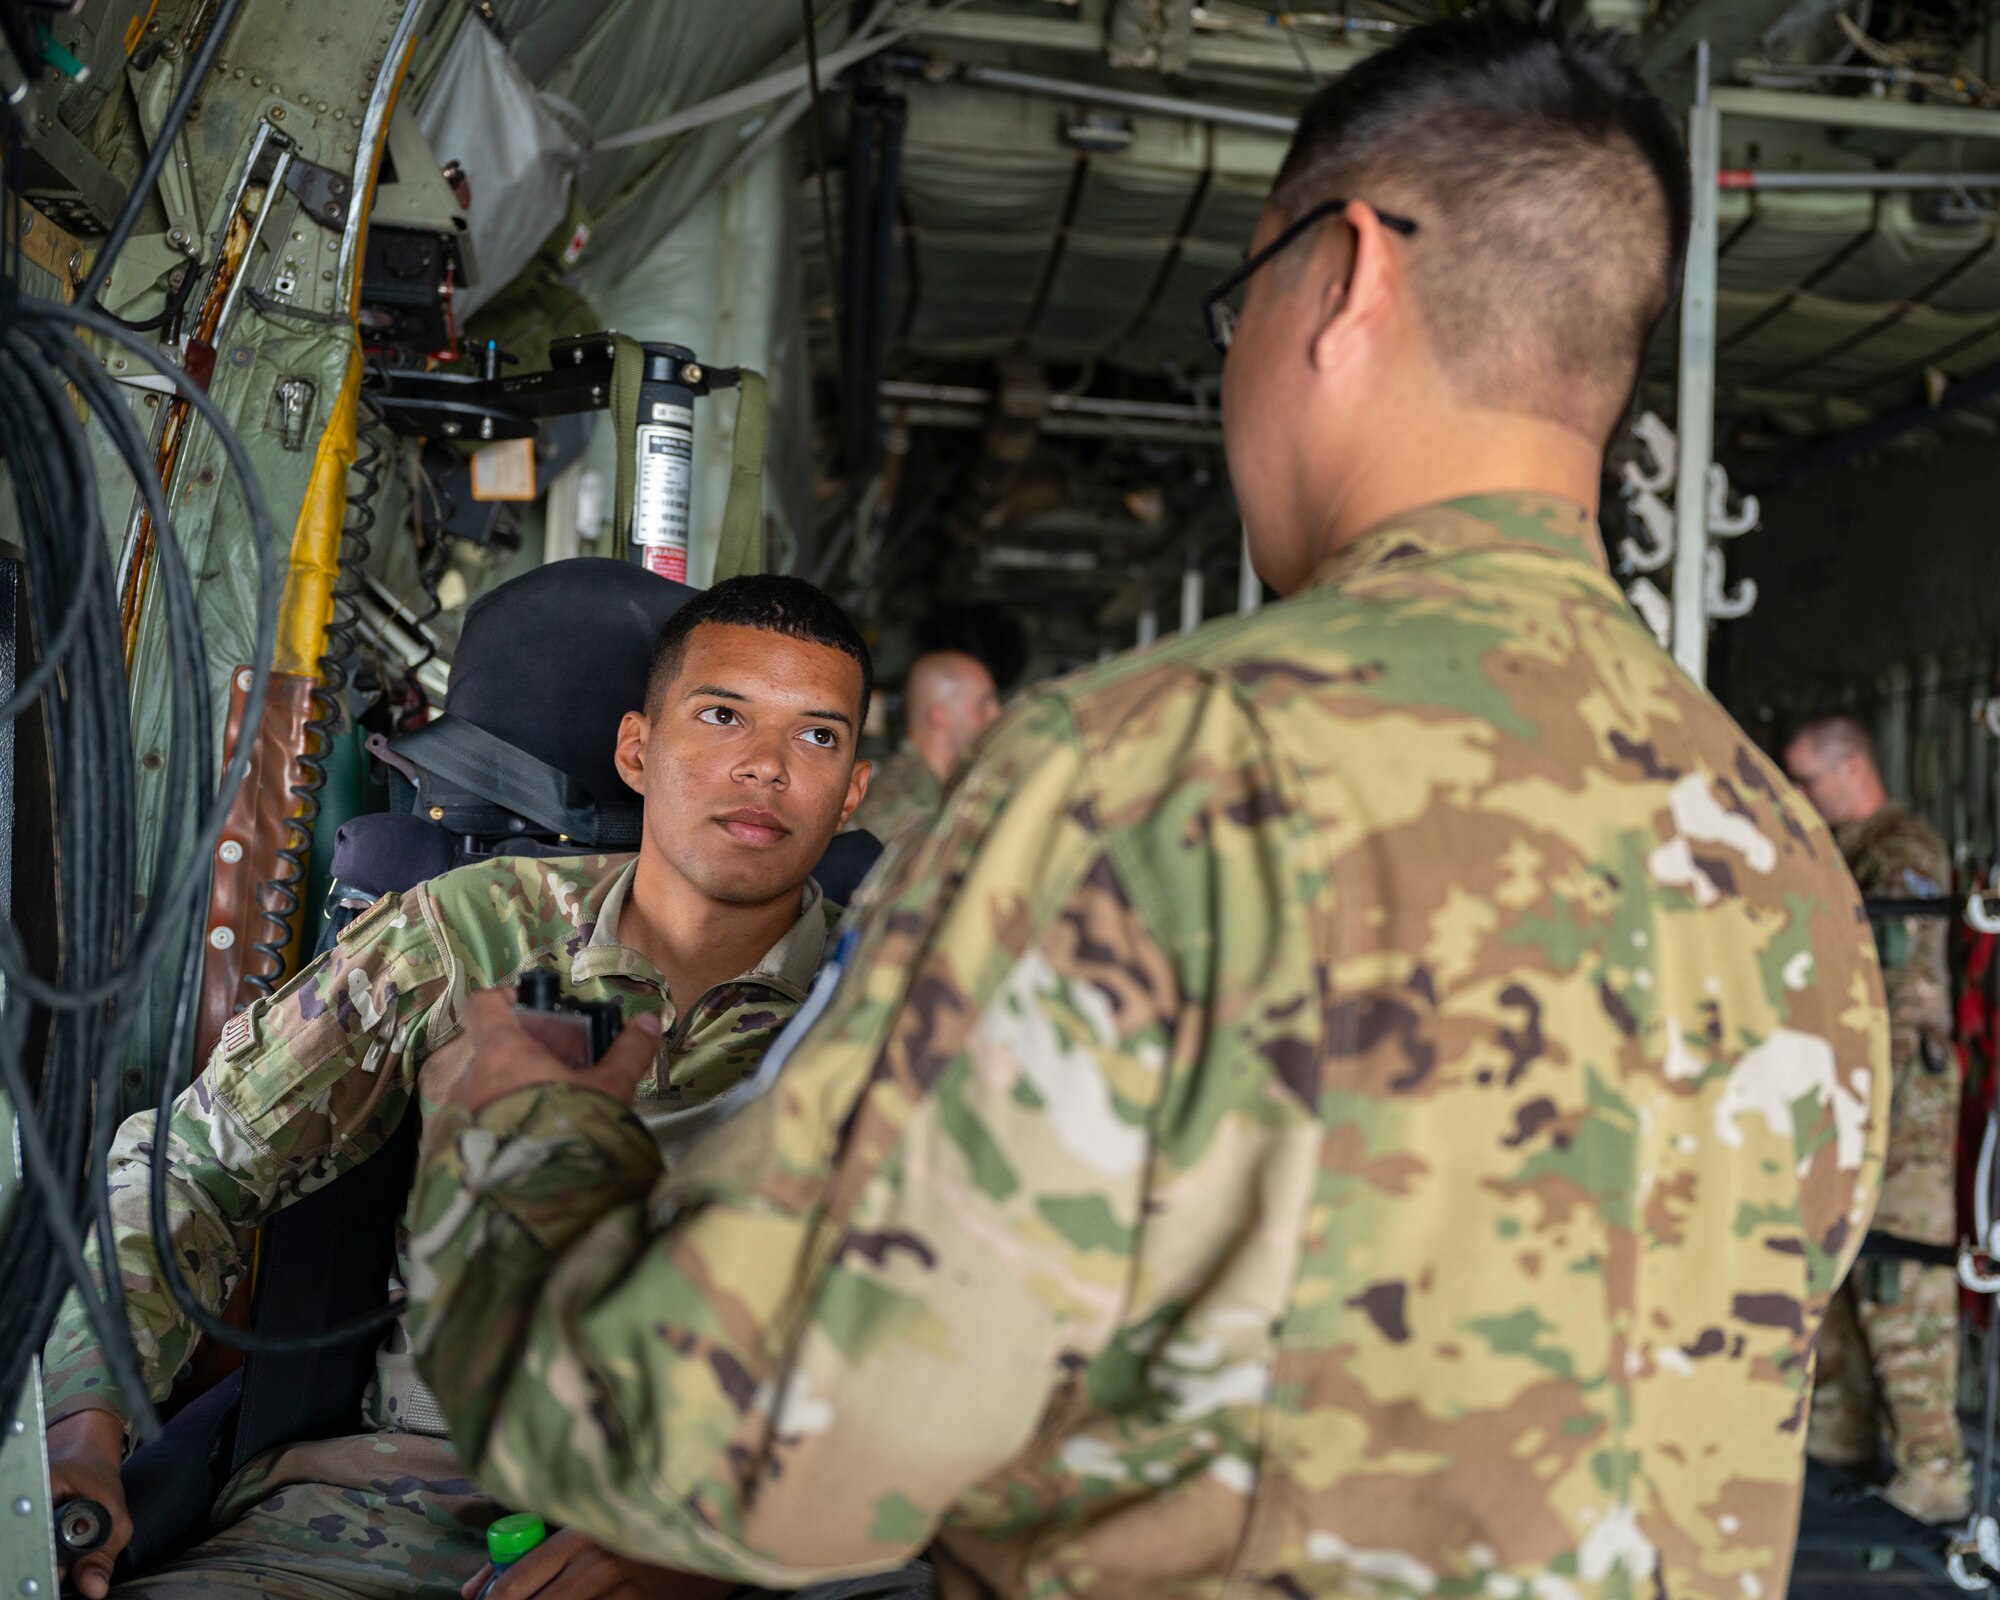 Tech. Sgt. Kyle Nagamatsu, a loadmaster assigned to the 779th Expeditionary Airlift Squadron, interacts with a visitor during a C-130H Hercules tour at Ali Al Salem Air Base, Kuwait, Oct. 9, 2021.